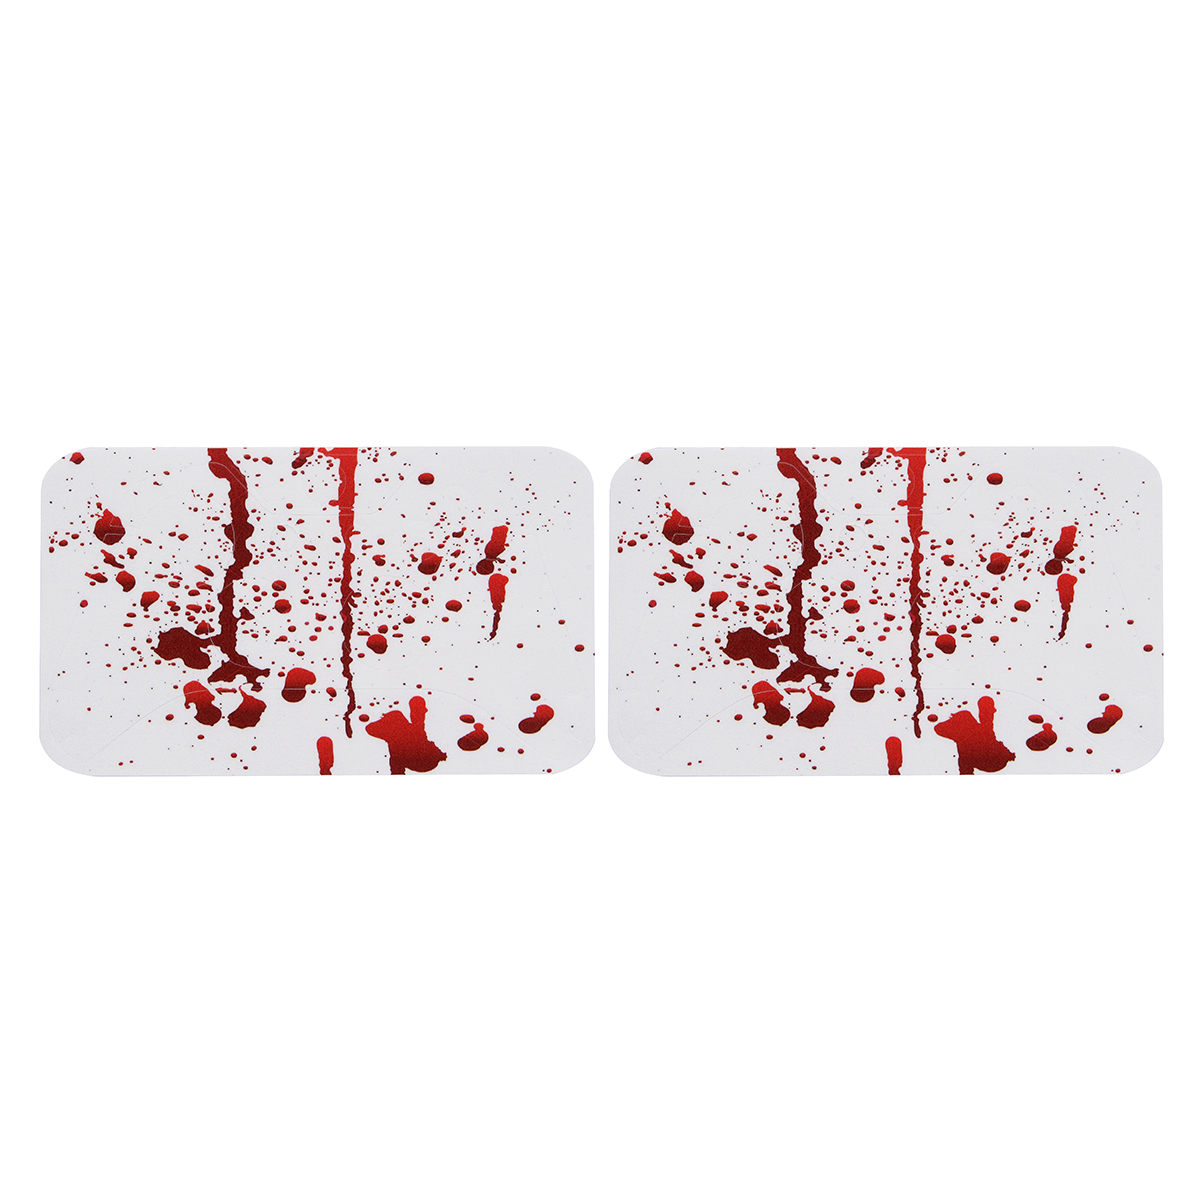 Bloody Skin Decals Stickers Cover for Xbox One S Game Console & 2 Controllers 23